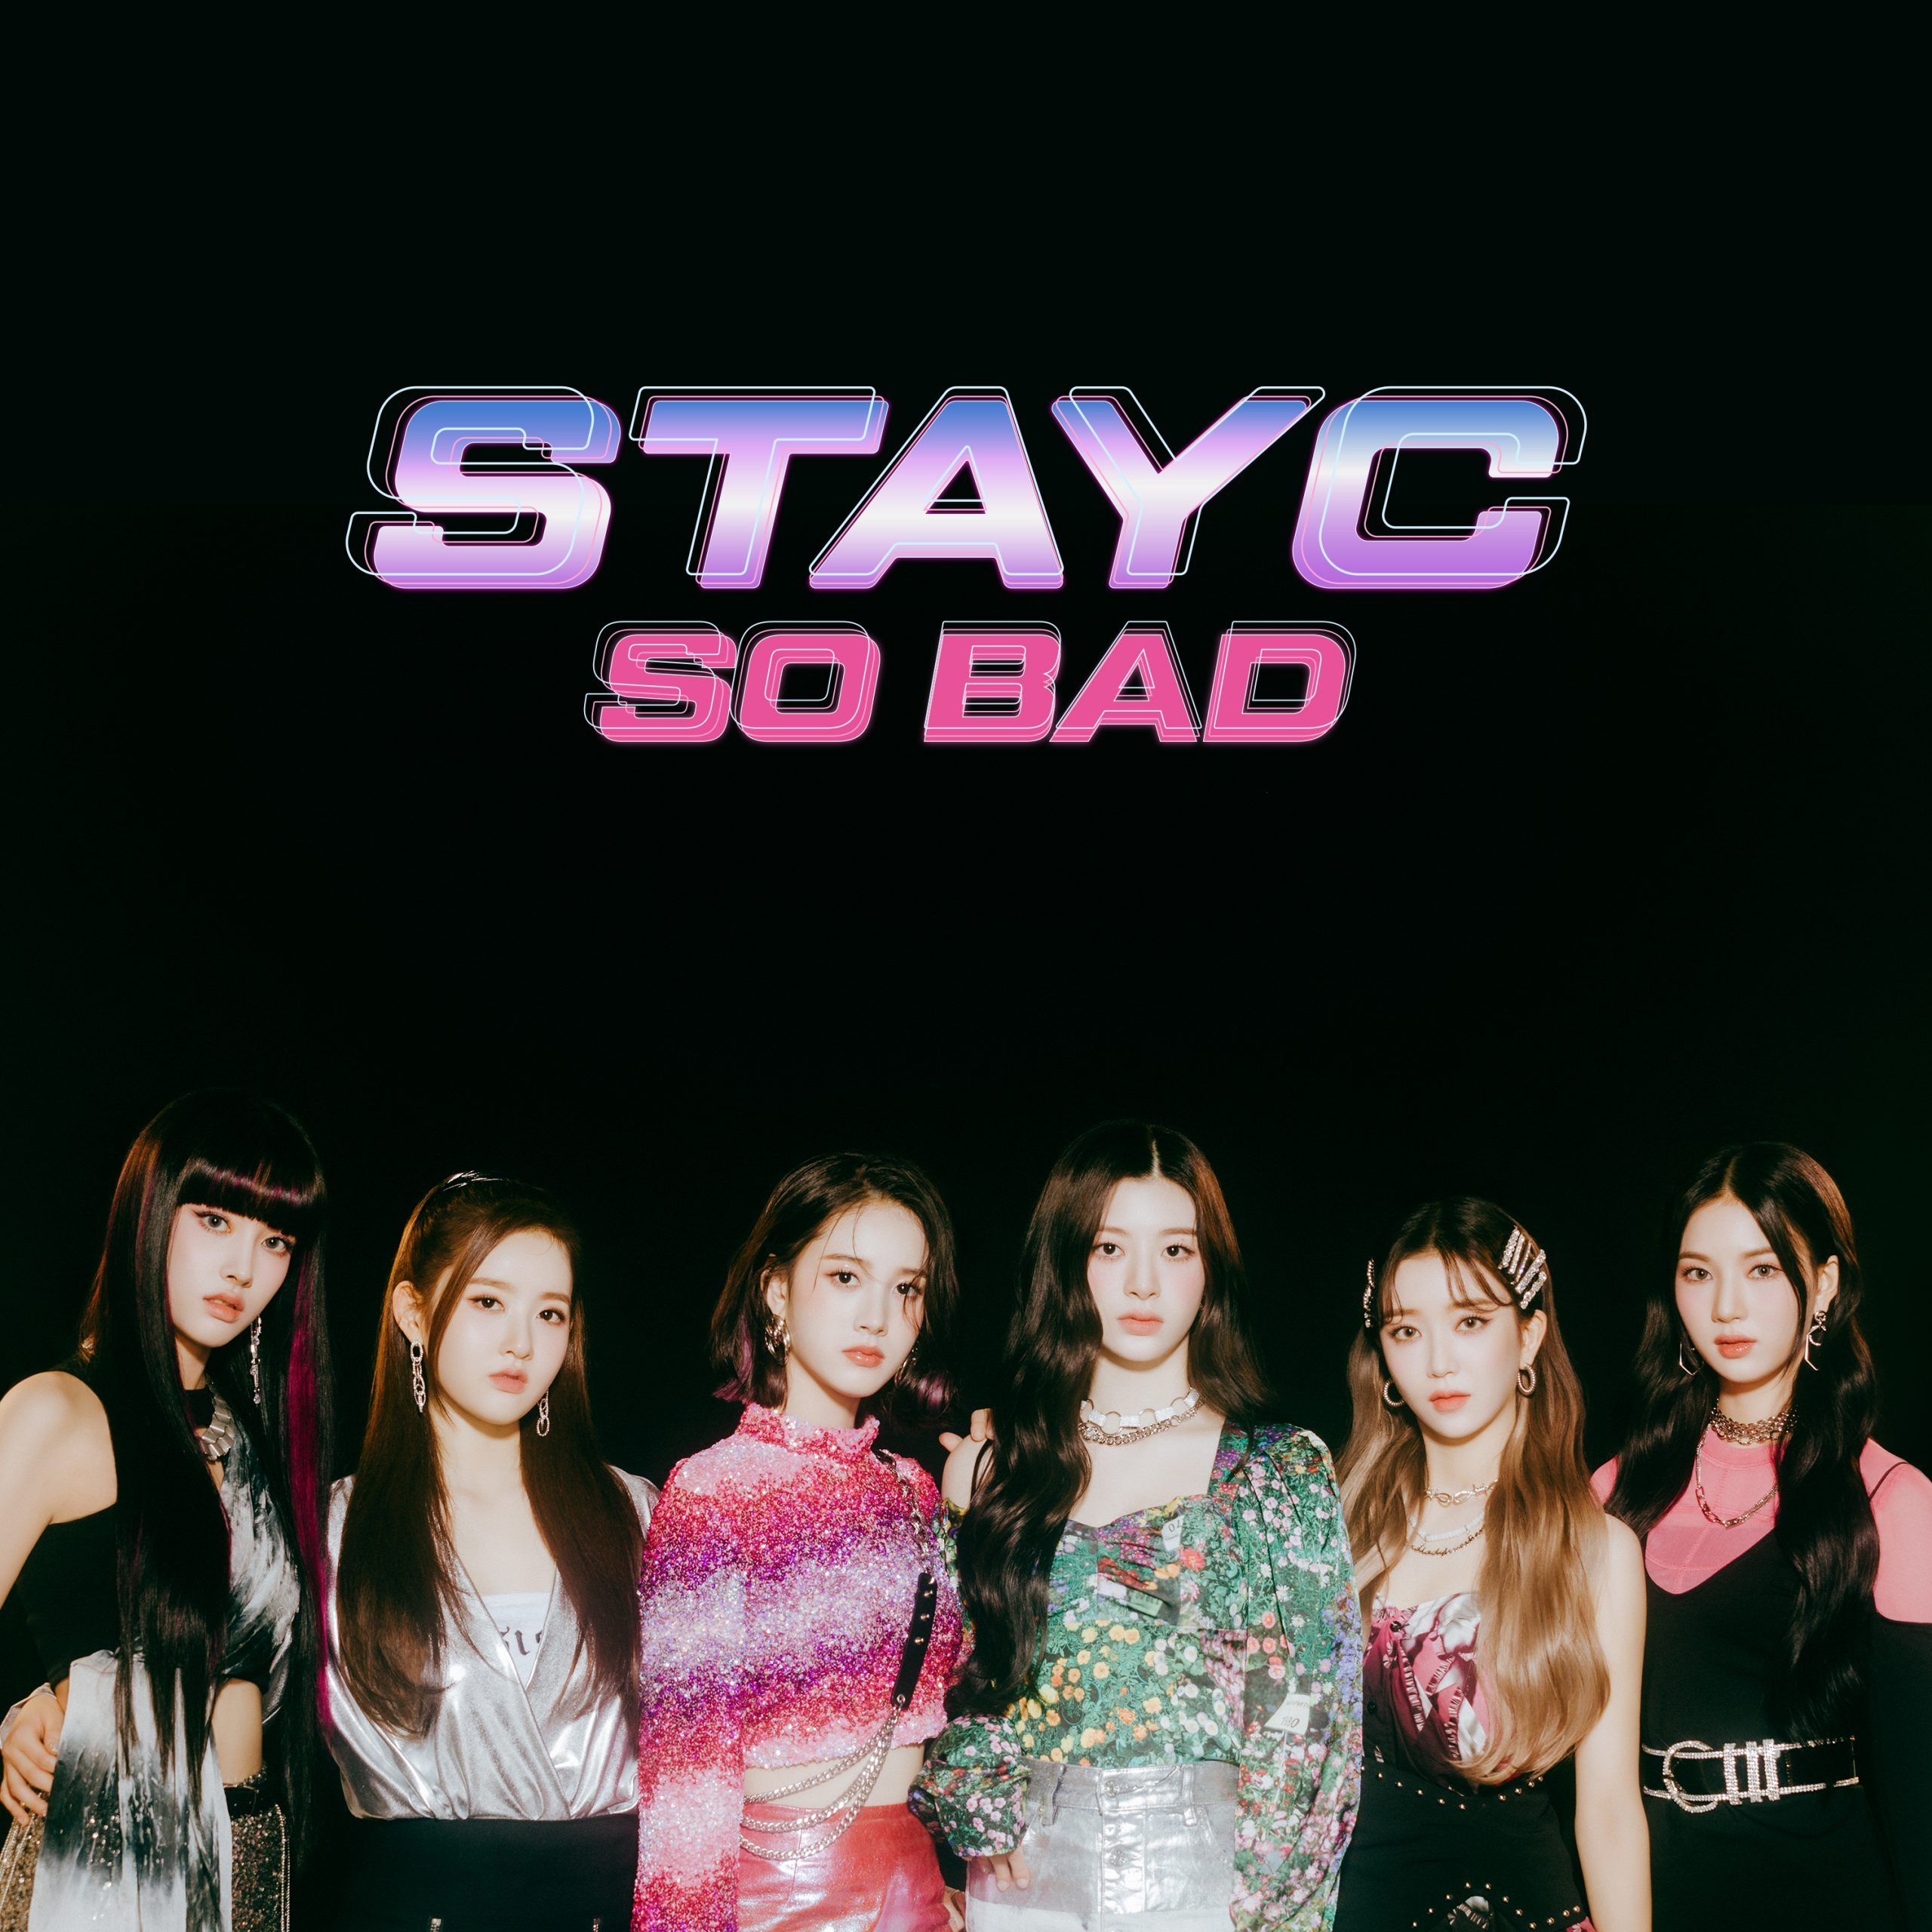 STAYC, getting a hot global reaction Top of the U.S. Billboard World Digital Song Chart Up Ent